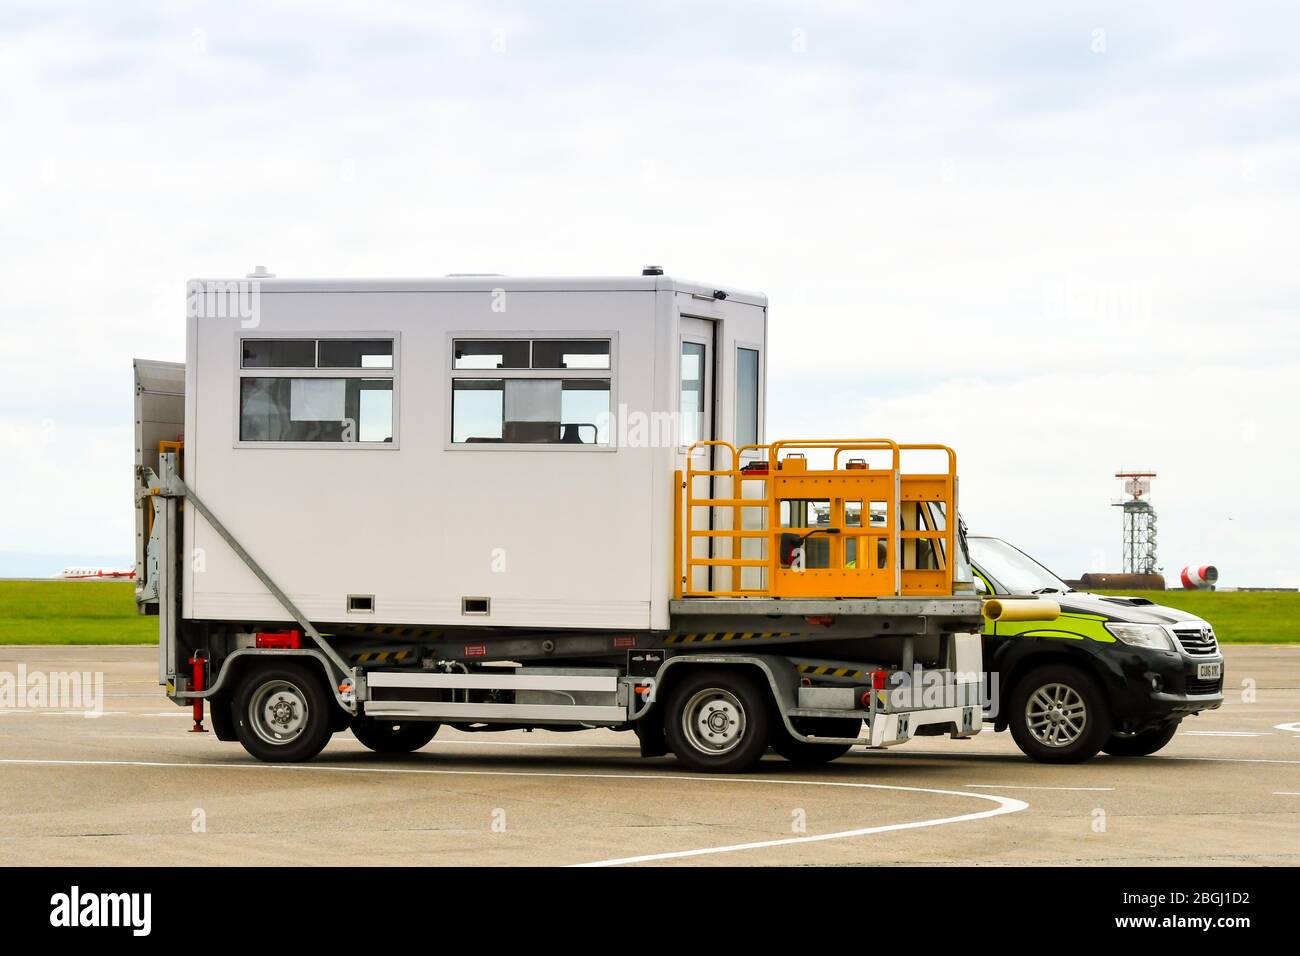 CARDIFF, WALES - JUNE 2019: Specialist hydraulic lift vehicle at Cardiff Wales Airport. It is used to lift passengers in wheelchairs up to an aircraft Stock Photo